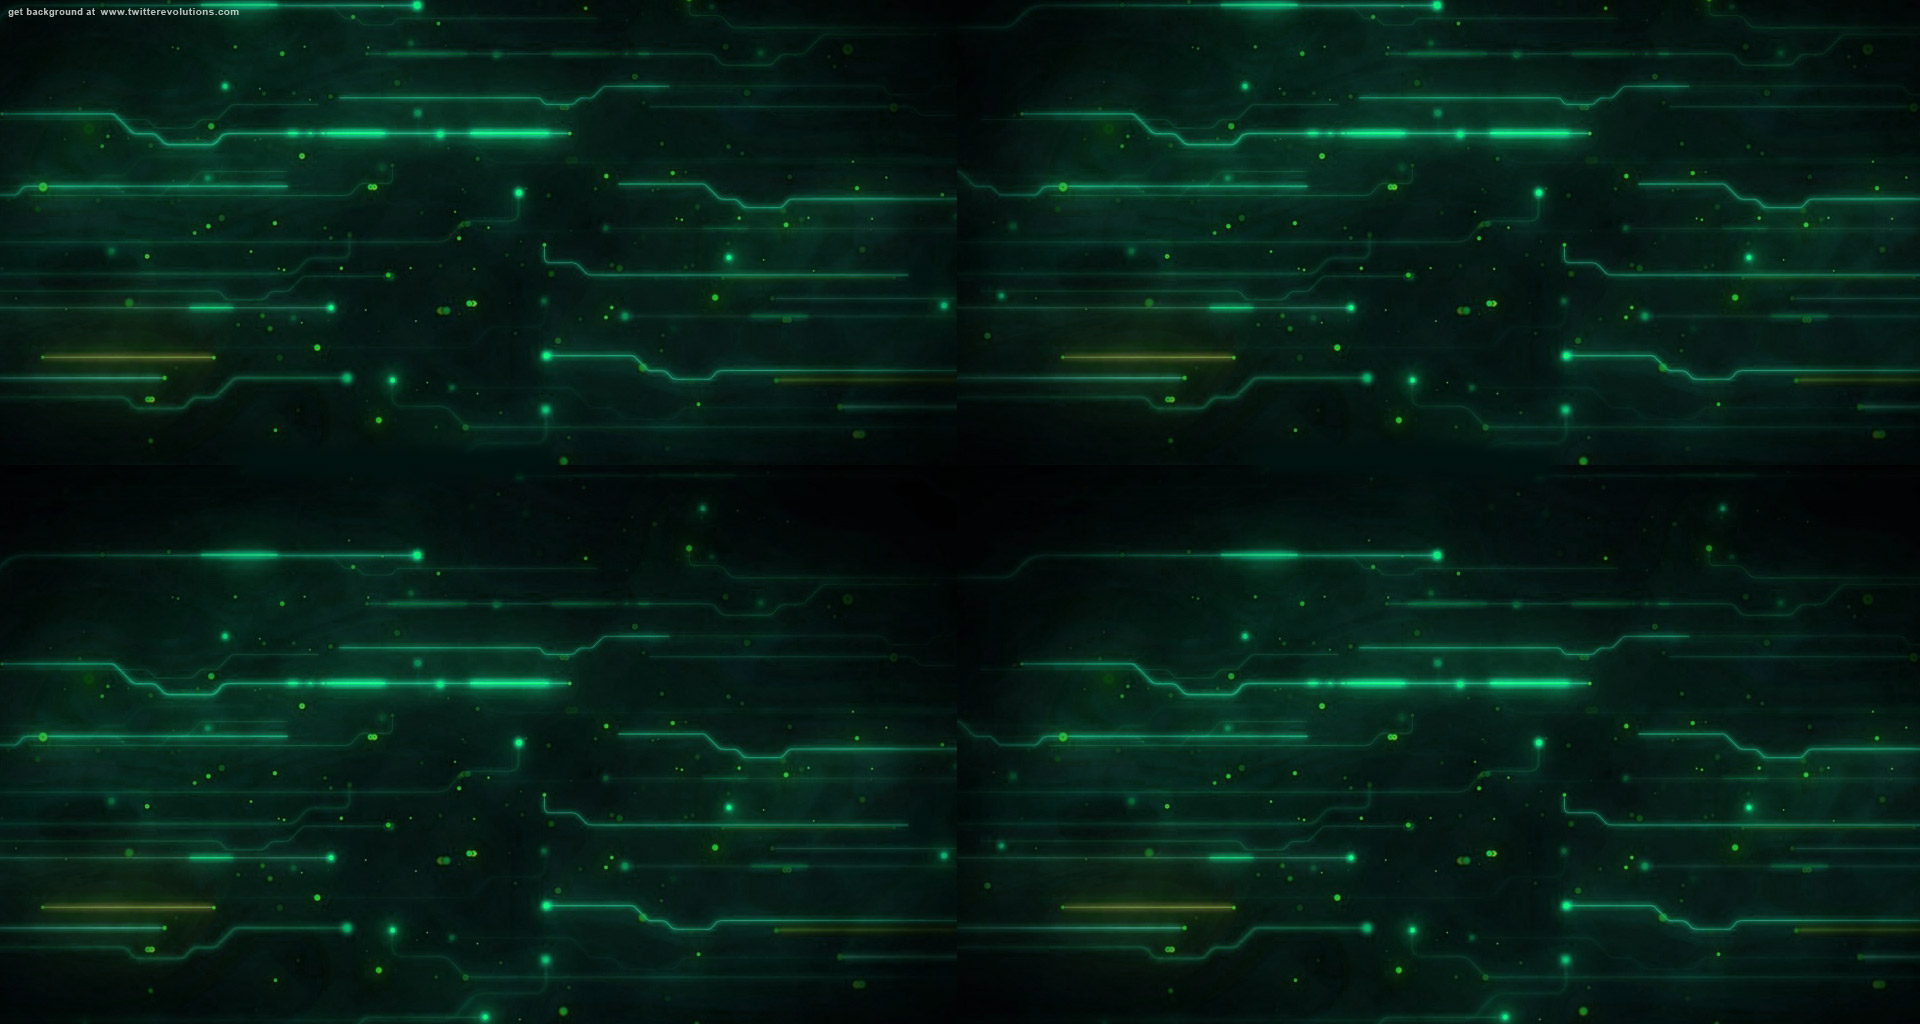 Circuit board background   Twitterevolutions